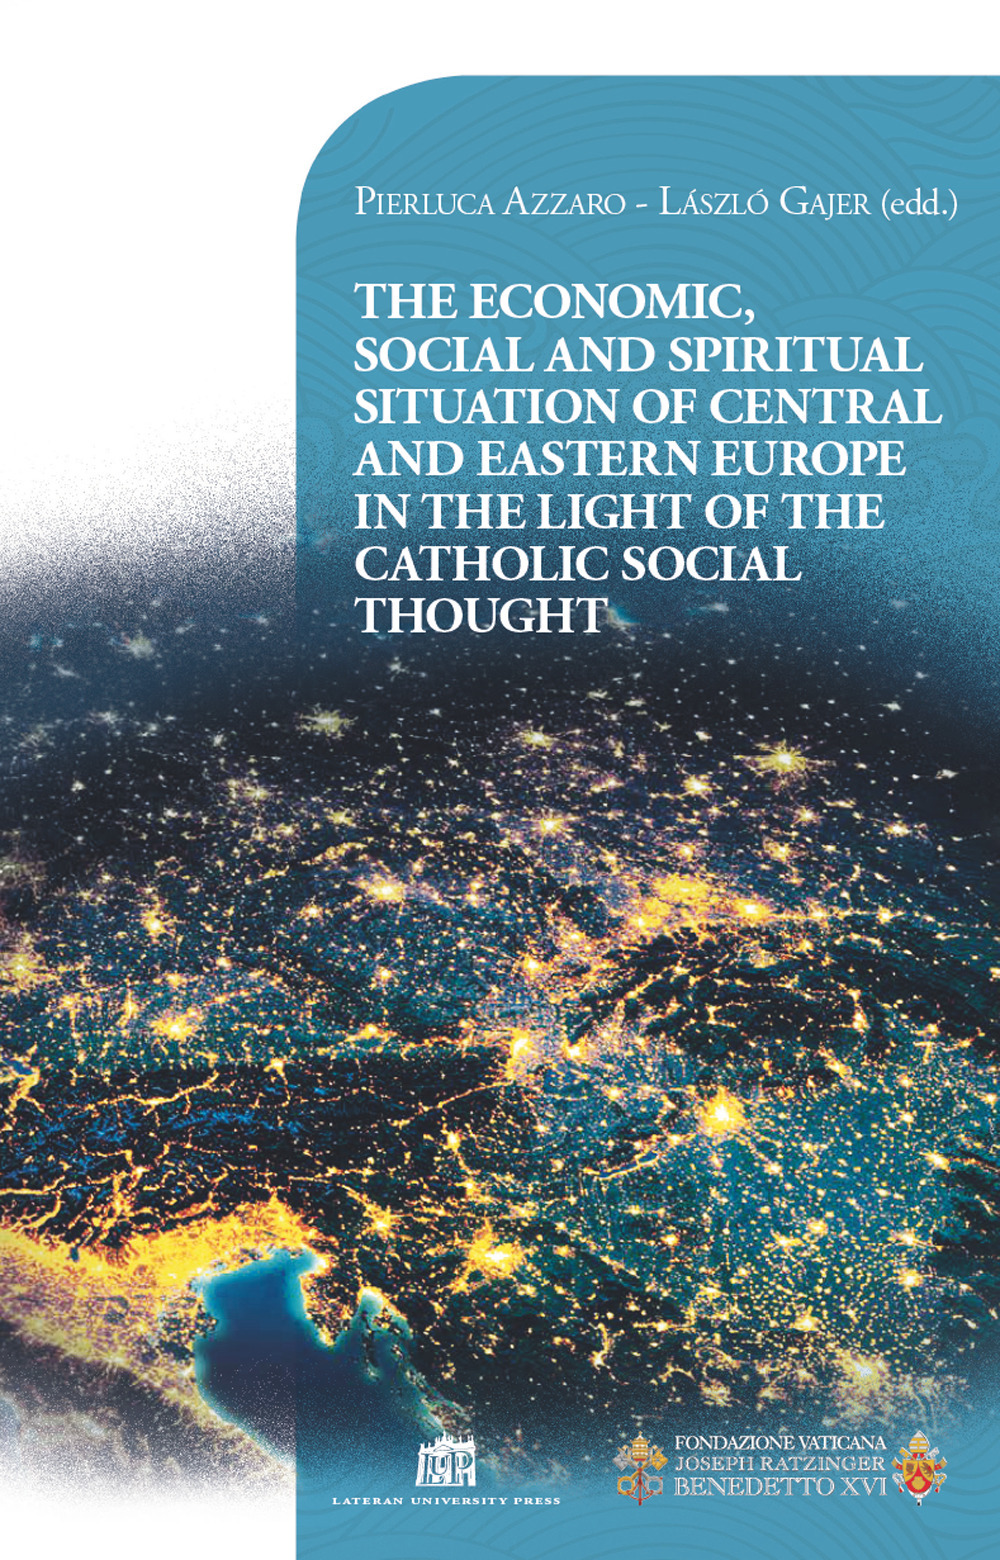 The economic, social and spiritual situation of central and eastern Europe in the light of the catholic social thought